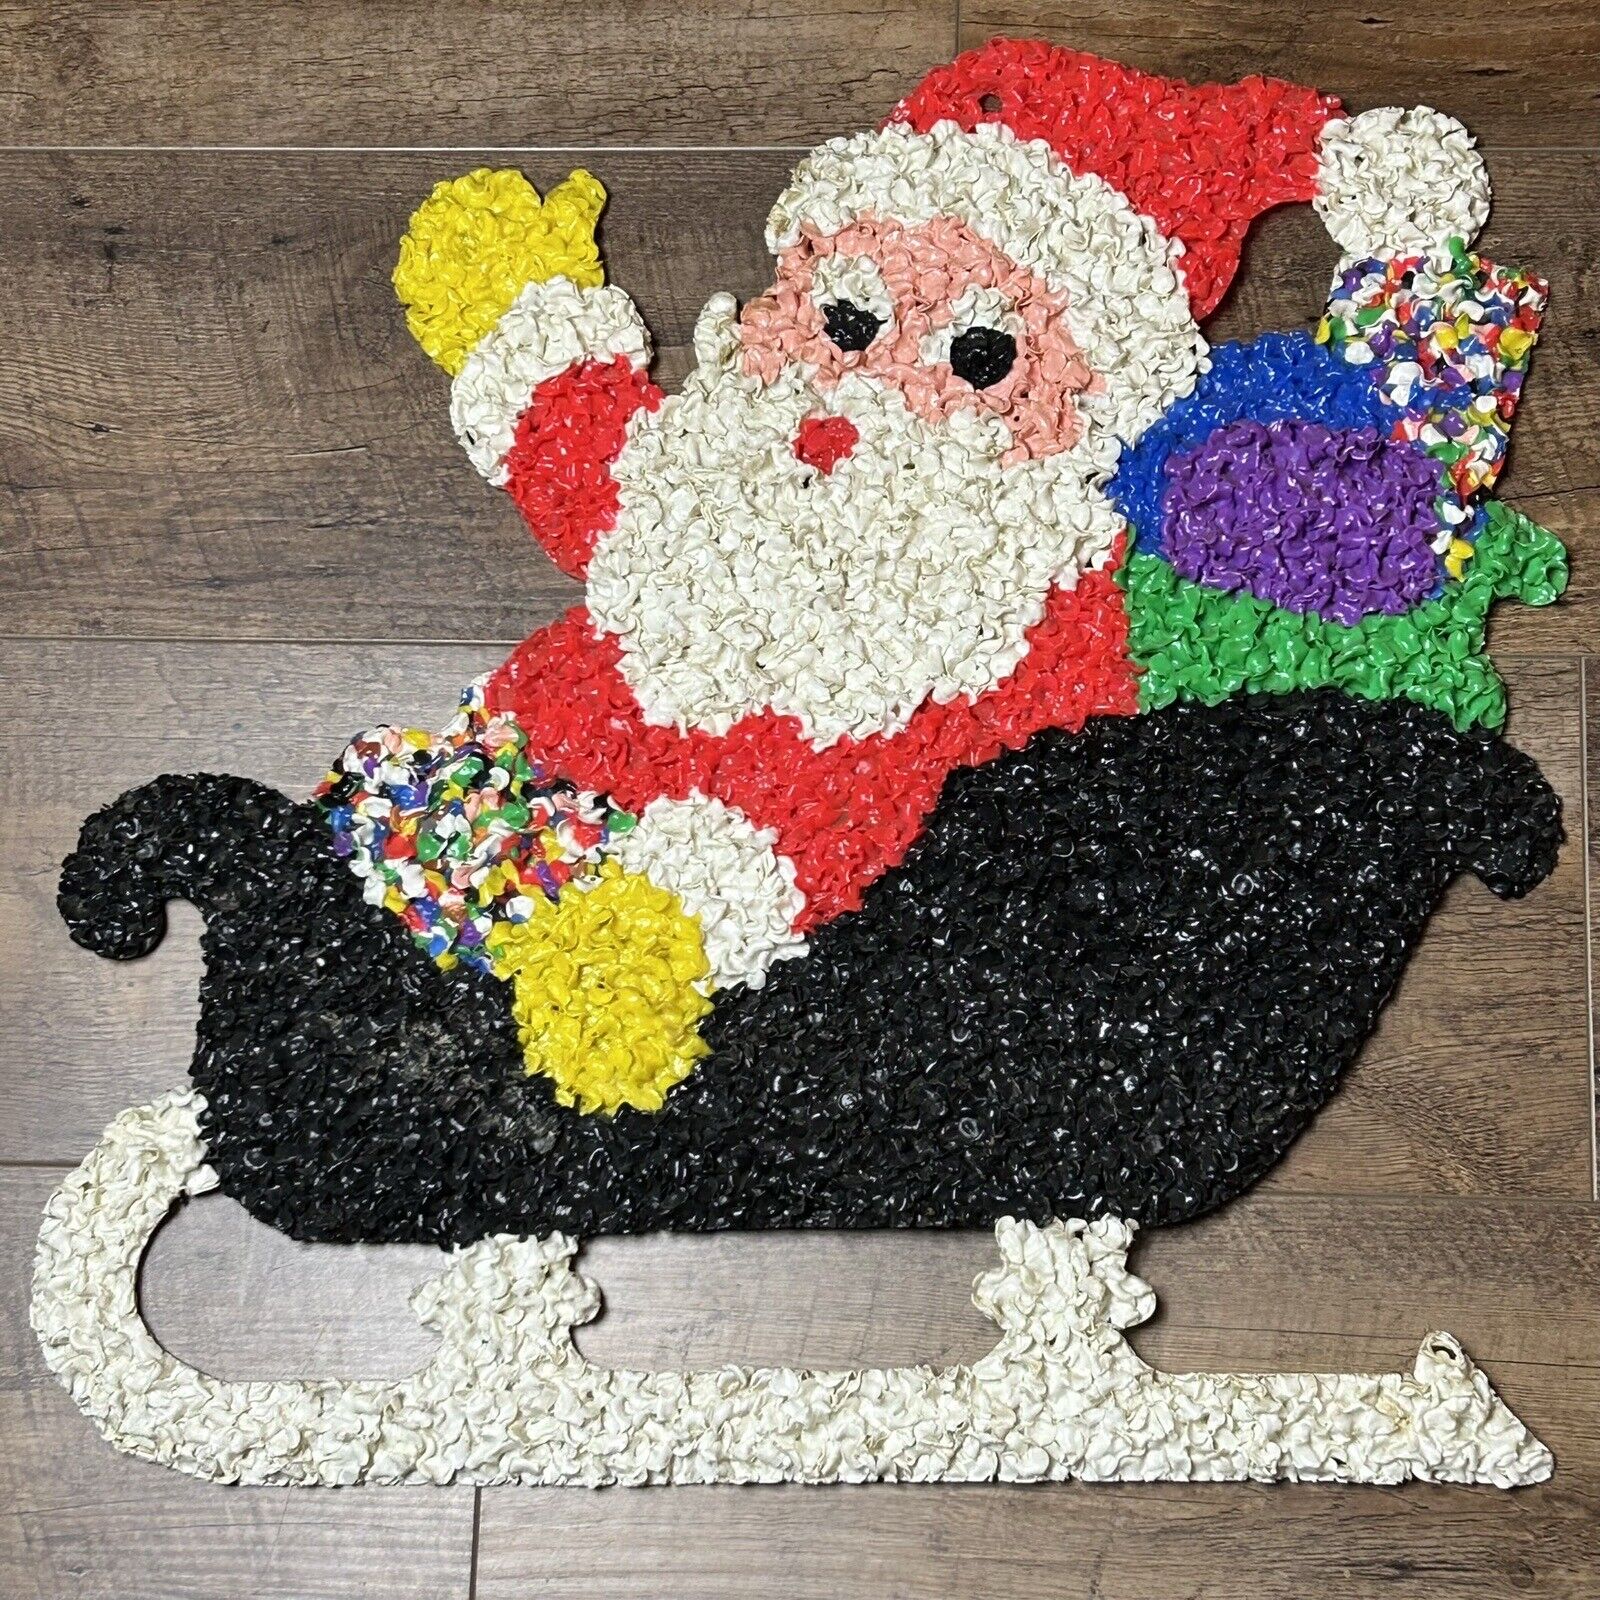 Vintage Santa Claus on Sleigh Melted Plastic Popcorn Wall Decor 22”x22”